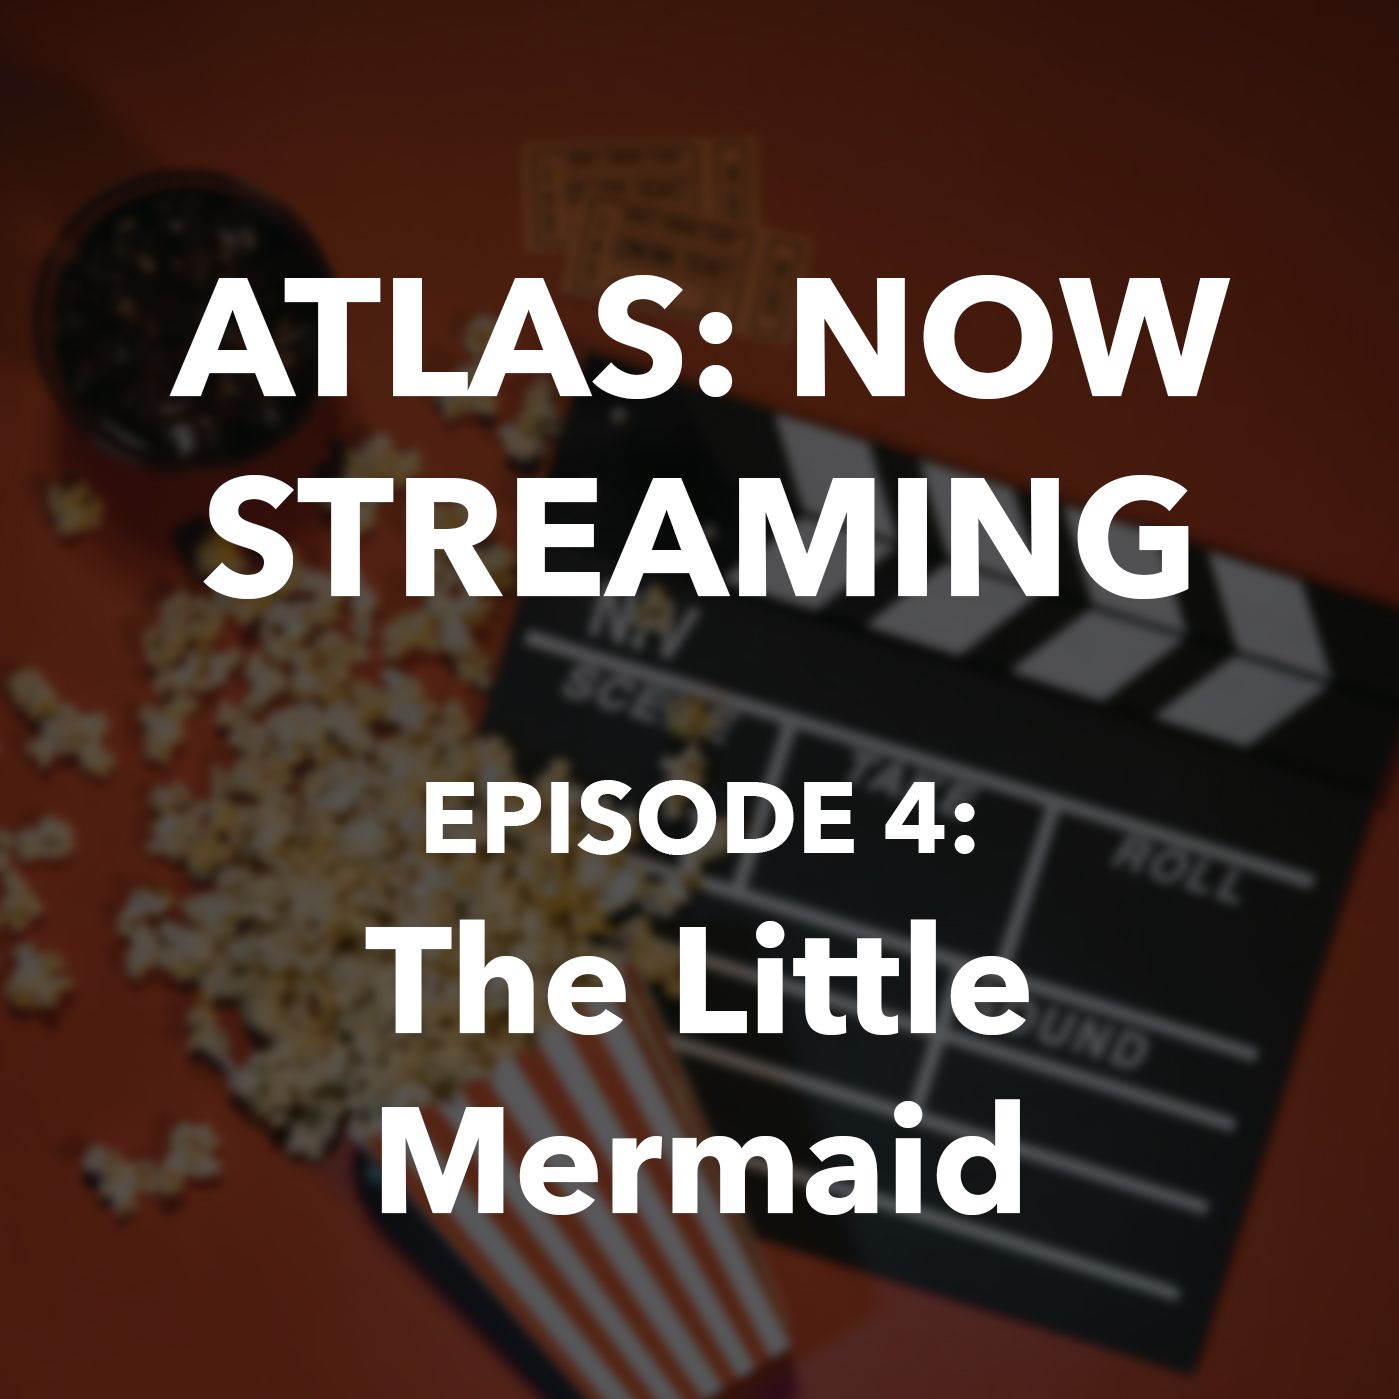 Atlas: Now Streaming Episode 4 - The Little Mermaid